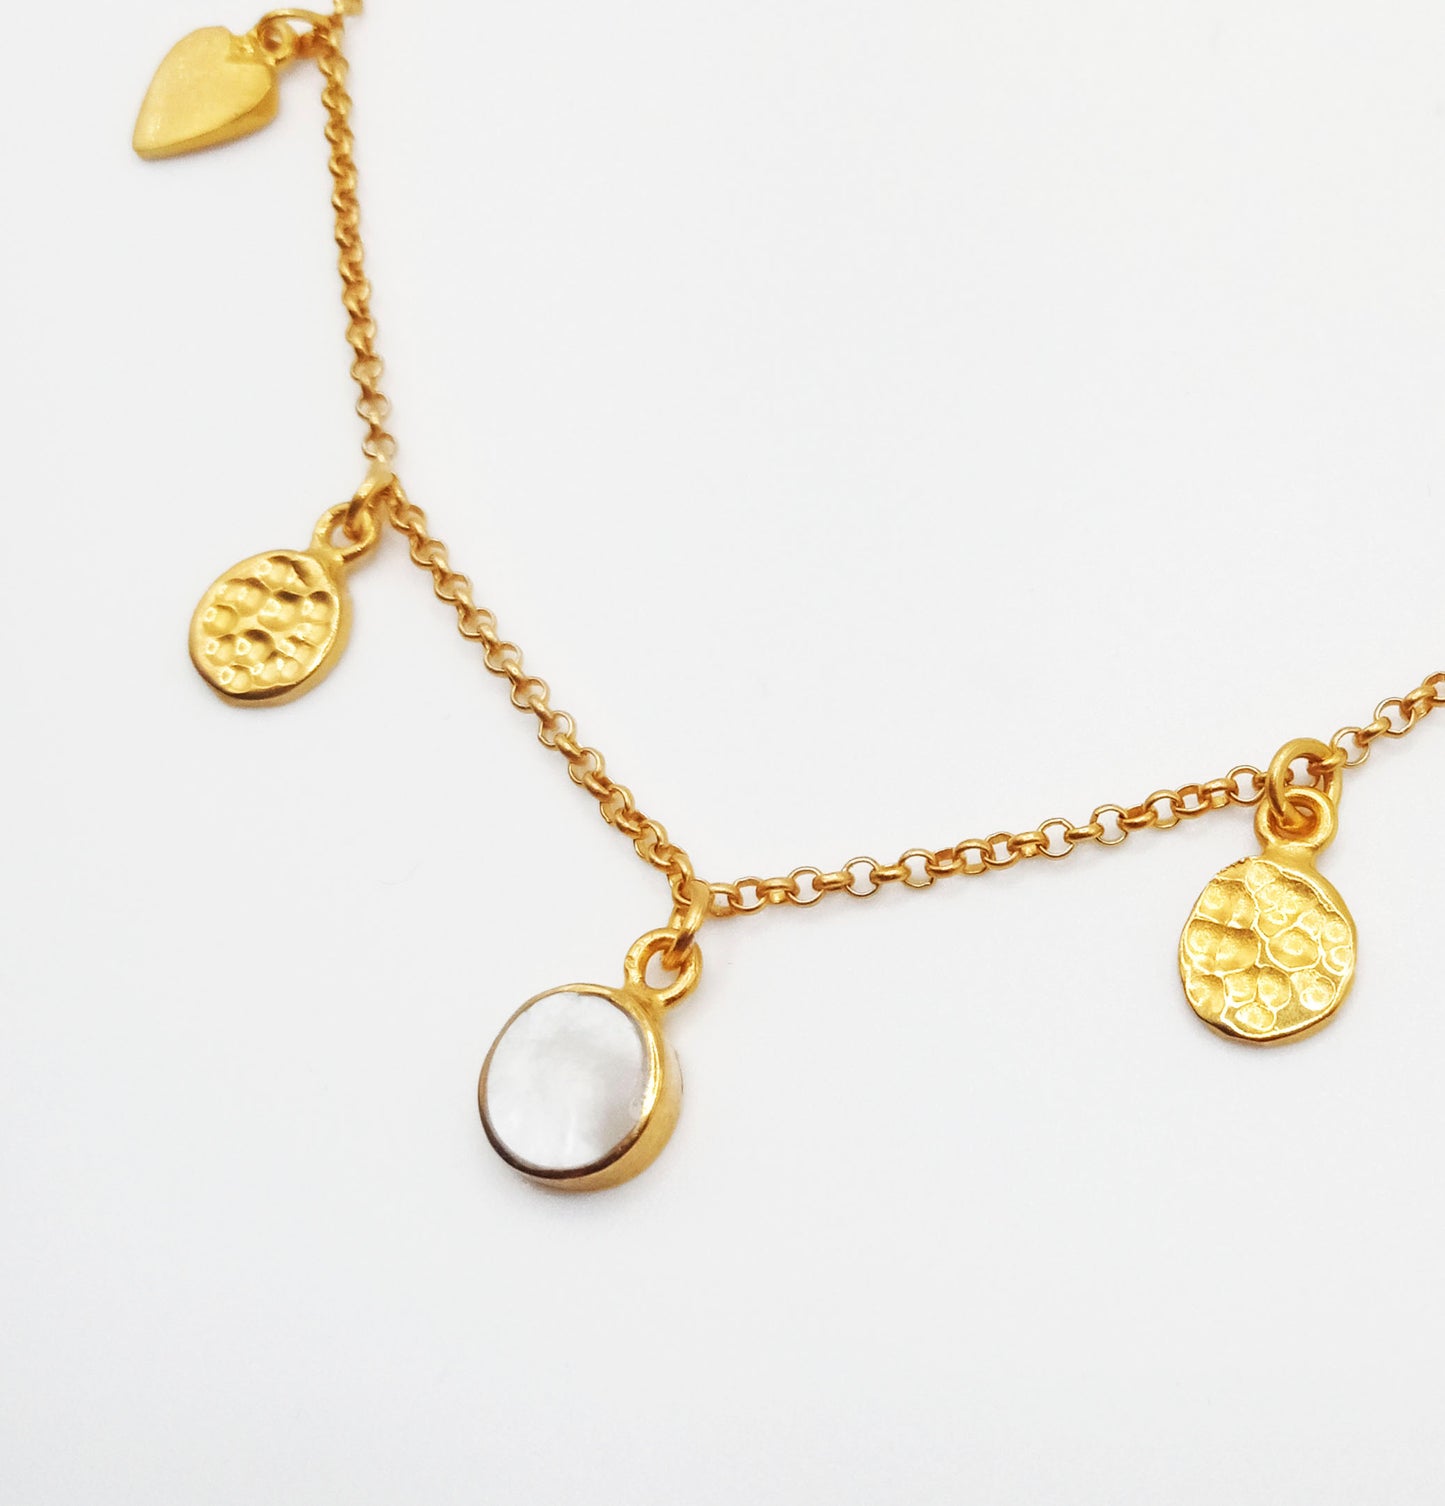 Dainty Mother of Pearl Heart Charm Necklace in 18kt Gold Vermeil